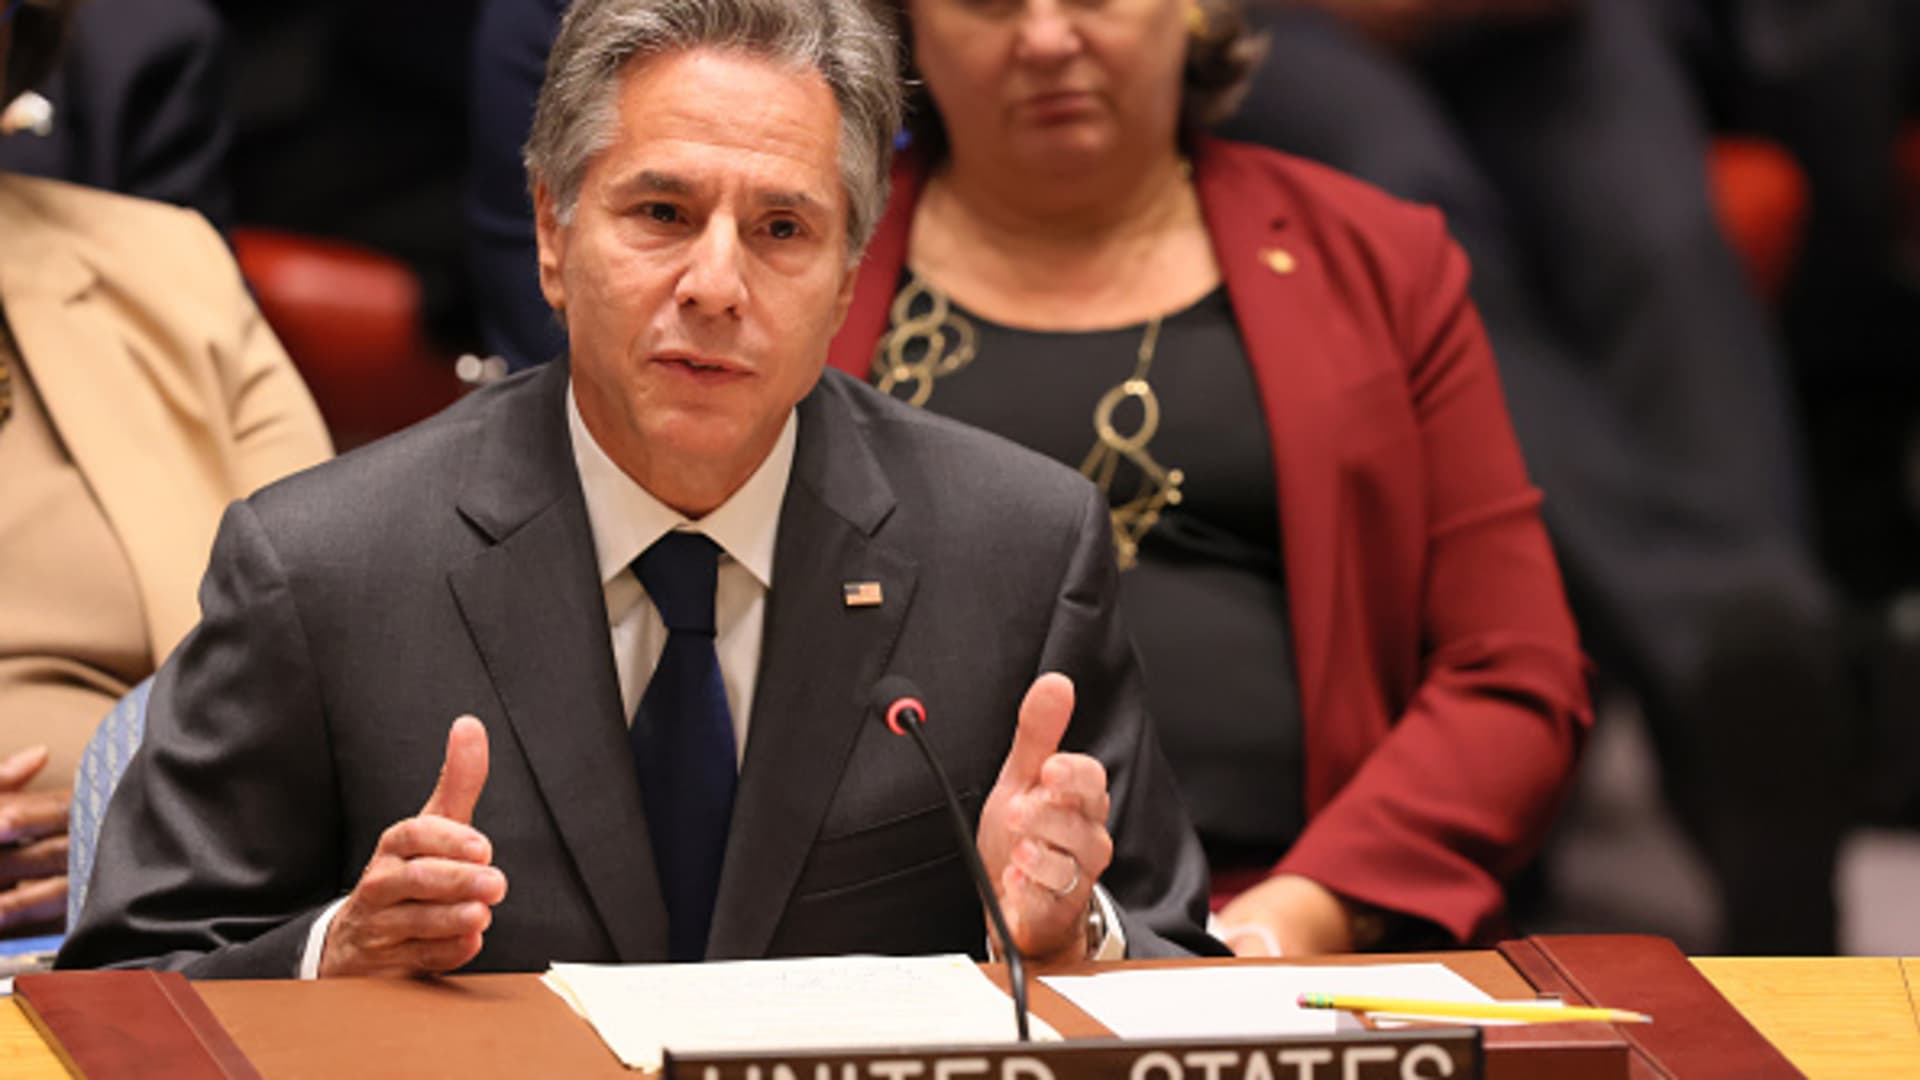 Secretary of State Antony Blinken speaks during the United Nations Security Council meeting at the United Nations Headquarters to discuss the conflict in Ukraine on September 22, 2022 in New York City.